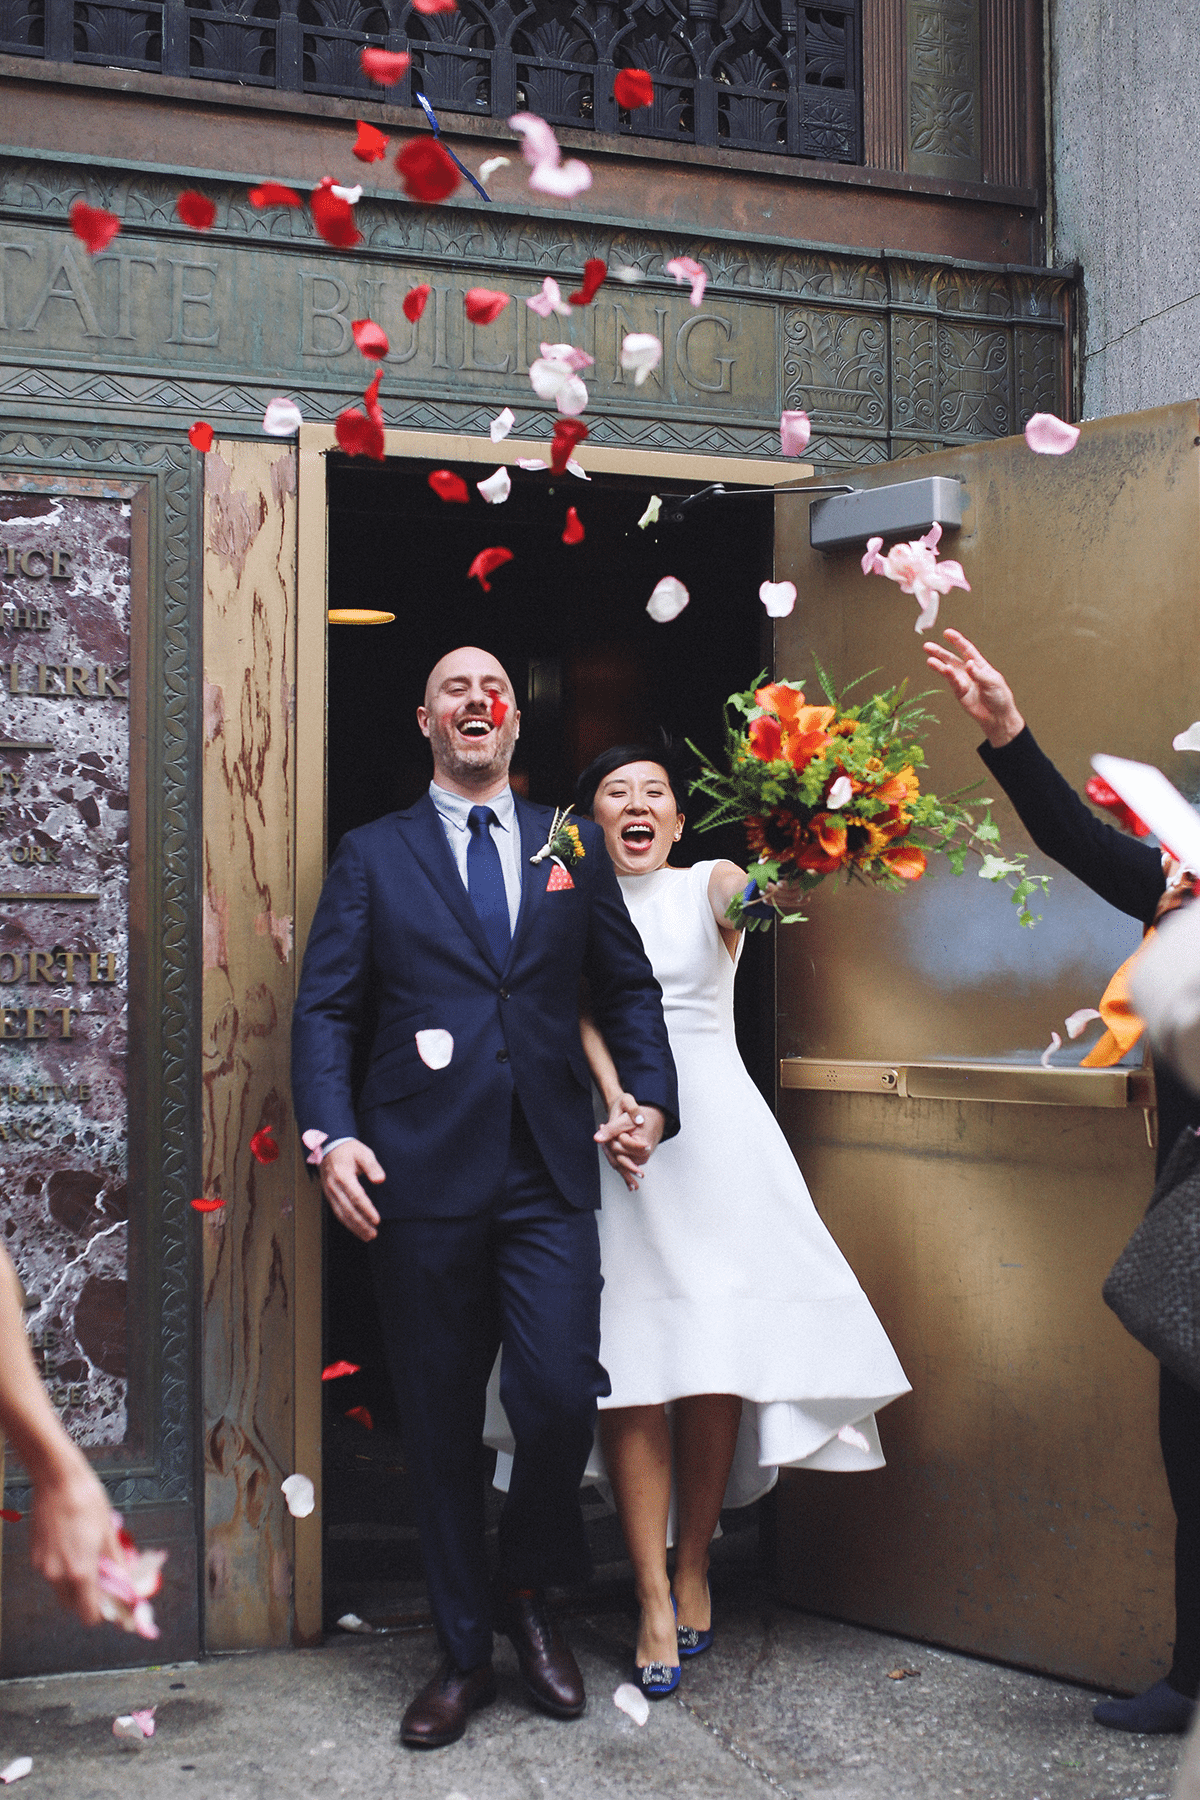 A couple exits their wedding ceremony with flower petals being thrown